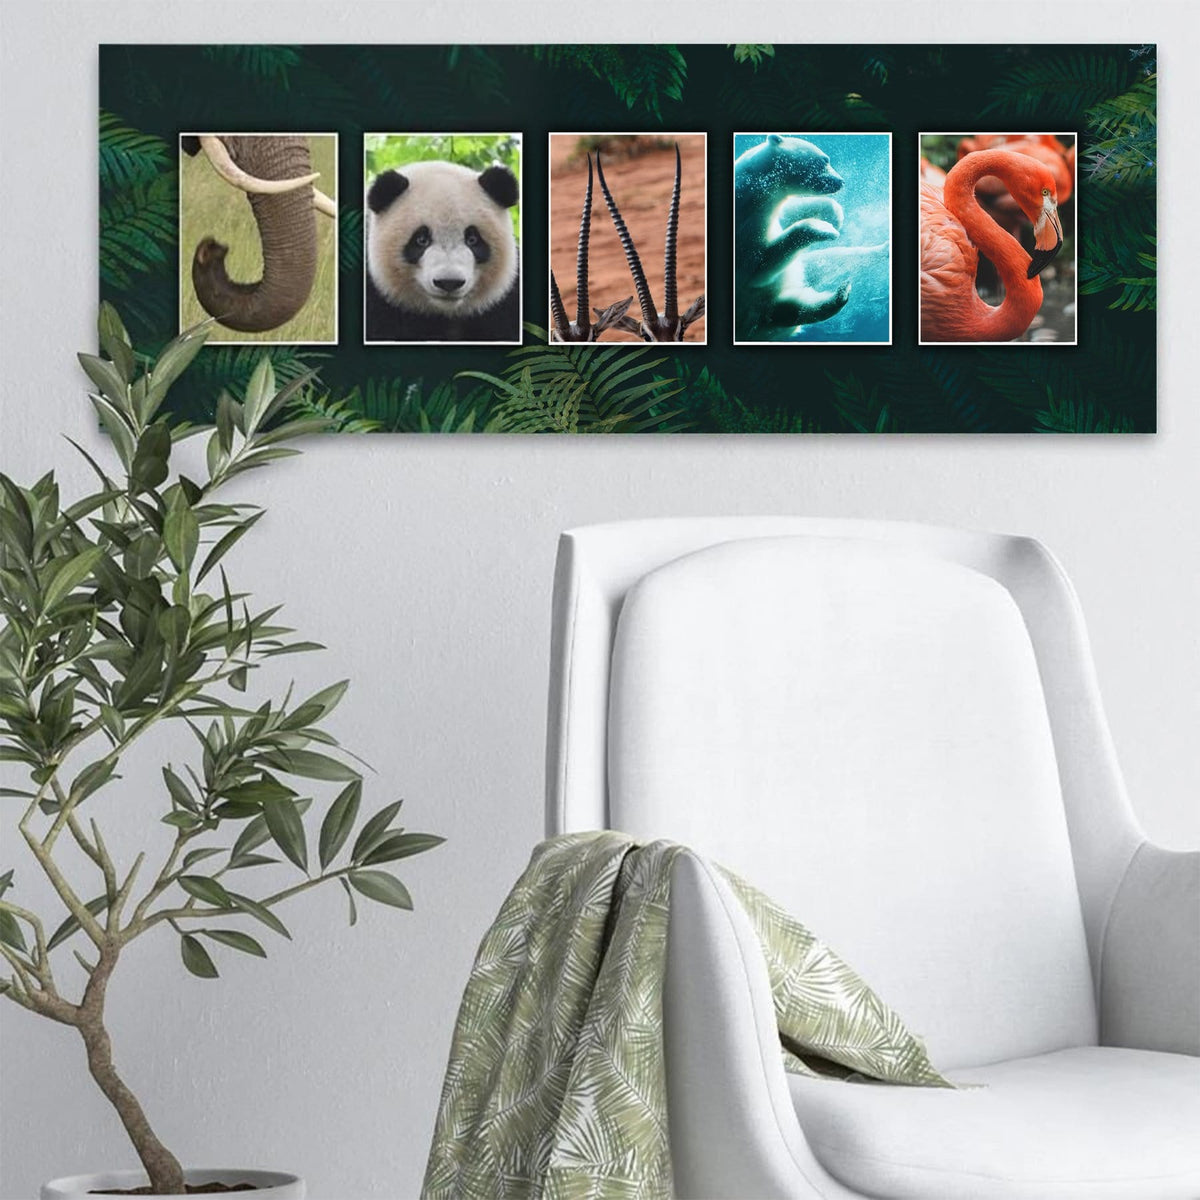 Personalized animal decor - gifts for animal lovers at Personal Prints